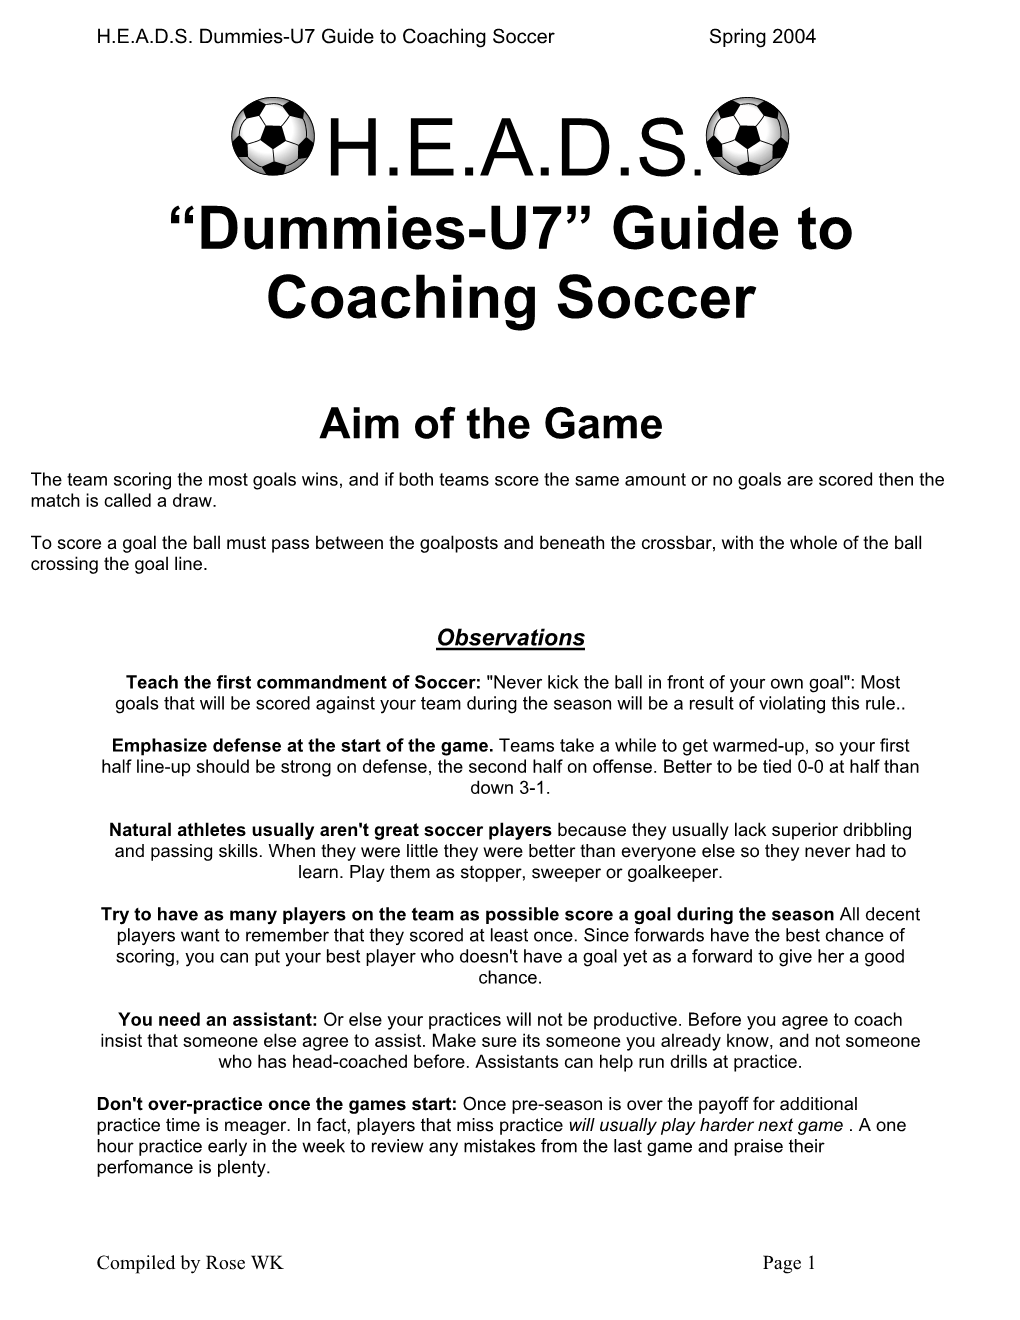 Guide to Coaching Soccer Aim of the Game